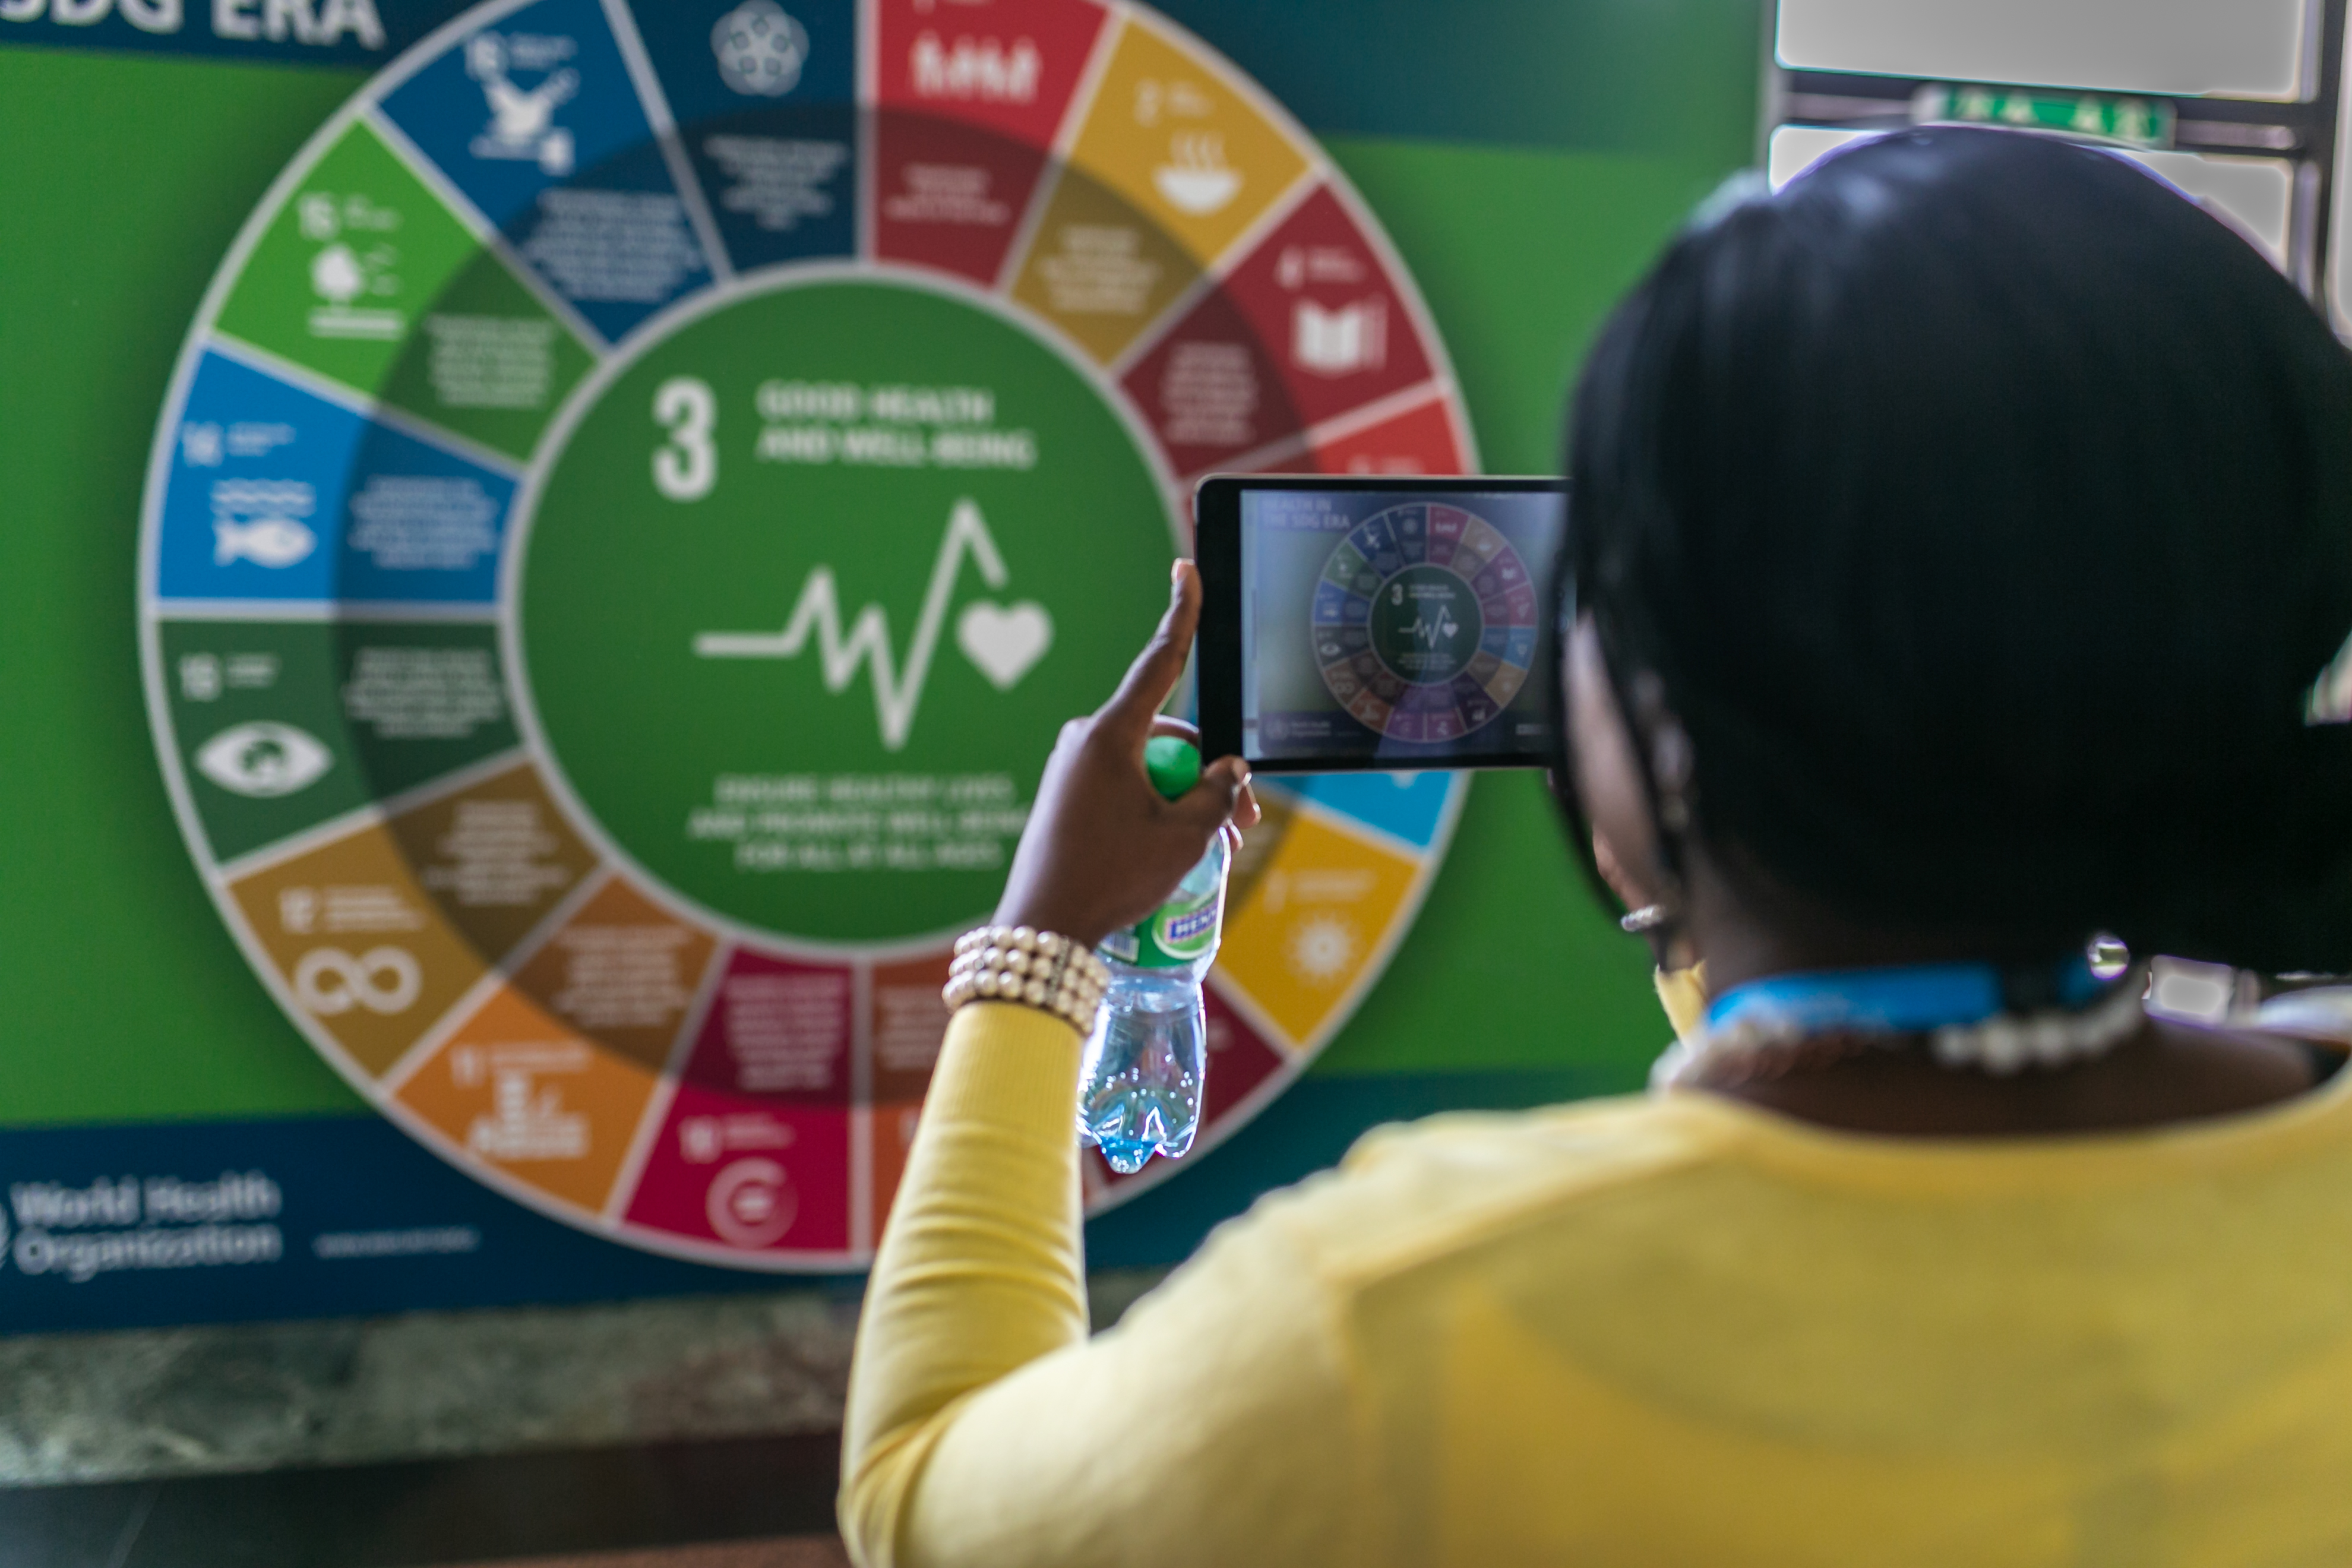 Imperial and The George Institute for Global Health to drive sustainable global health systems